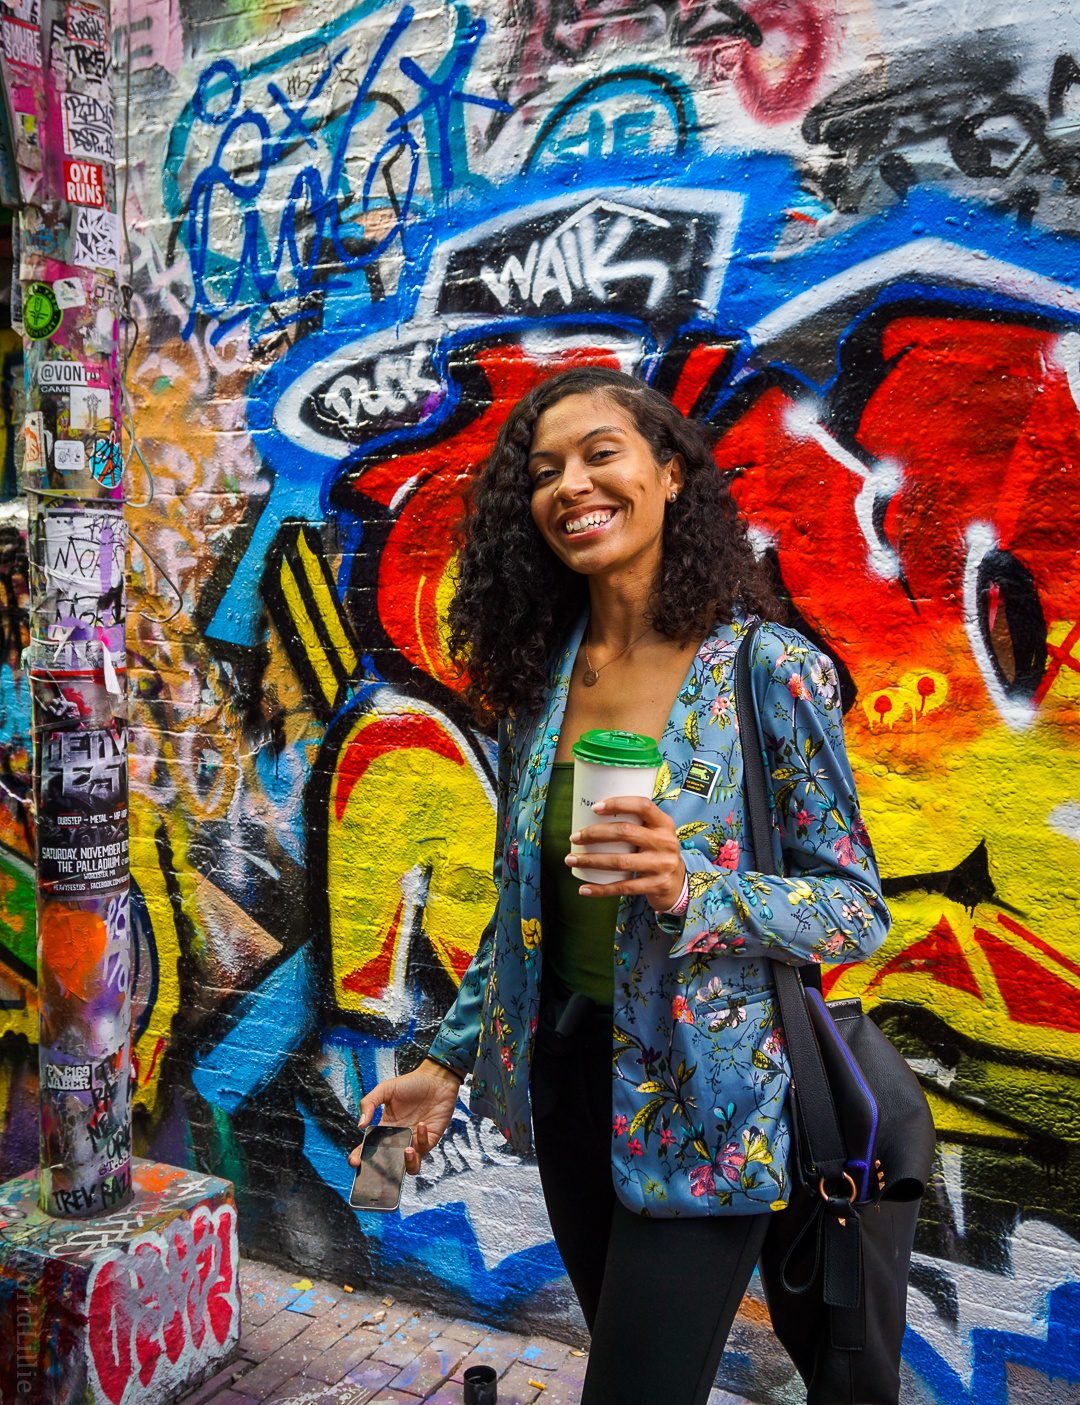 Central Square in Cambridge, MA has some of the best mural arts and local food in the Boston area, including Graffiti Alley! See tips from a tour that focuses on unique small businesses!